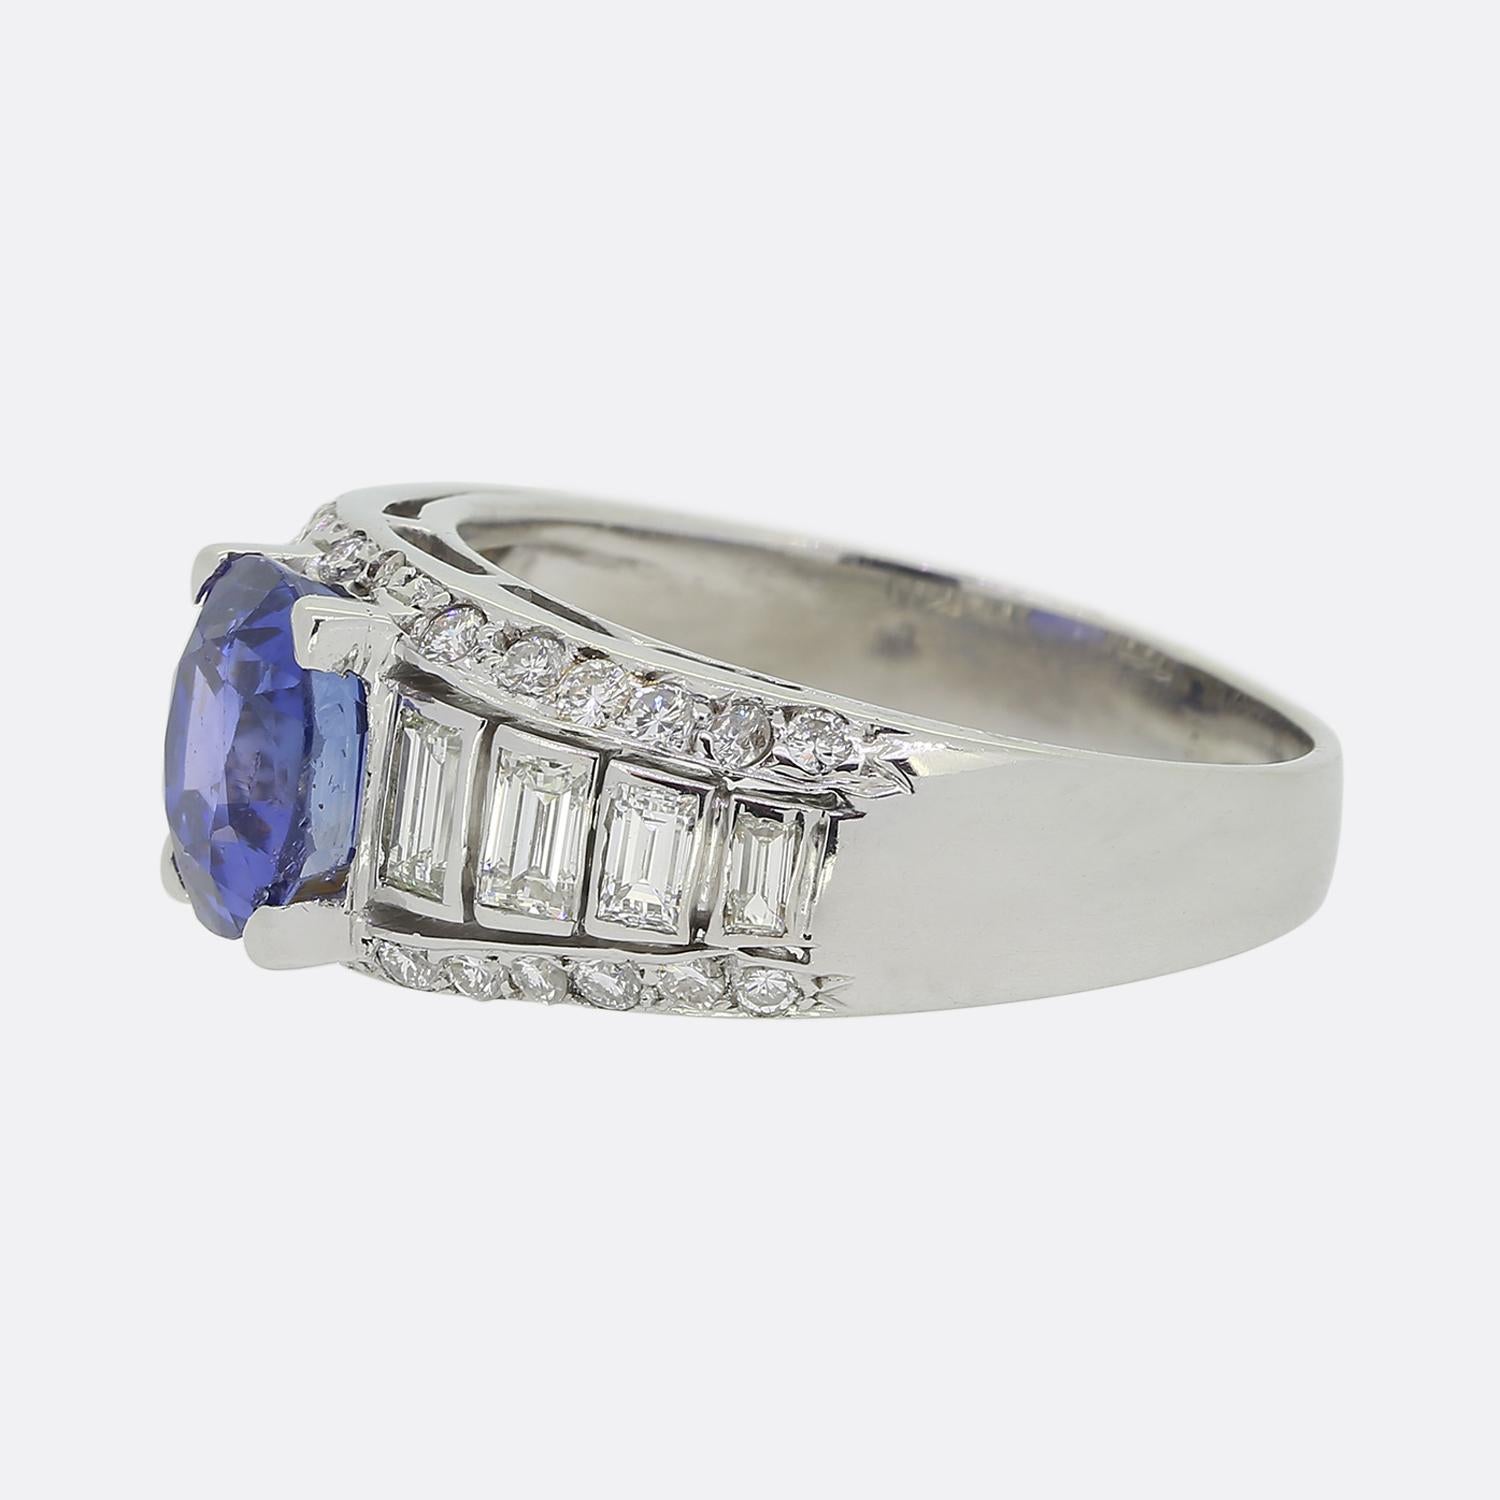 Here we have a delightful sapphire and diamond cluster ring. A single cushion cut sapphire of Ceylon origin boasting a wondrous cornflower blue colour tone sits slightly risen at the centre of the face. This principal stone is then flanked on either